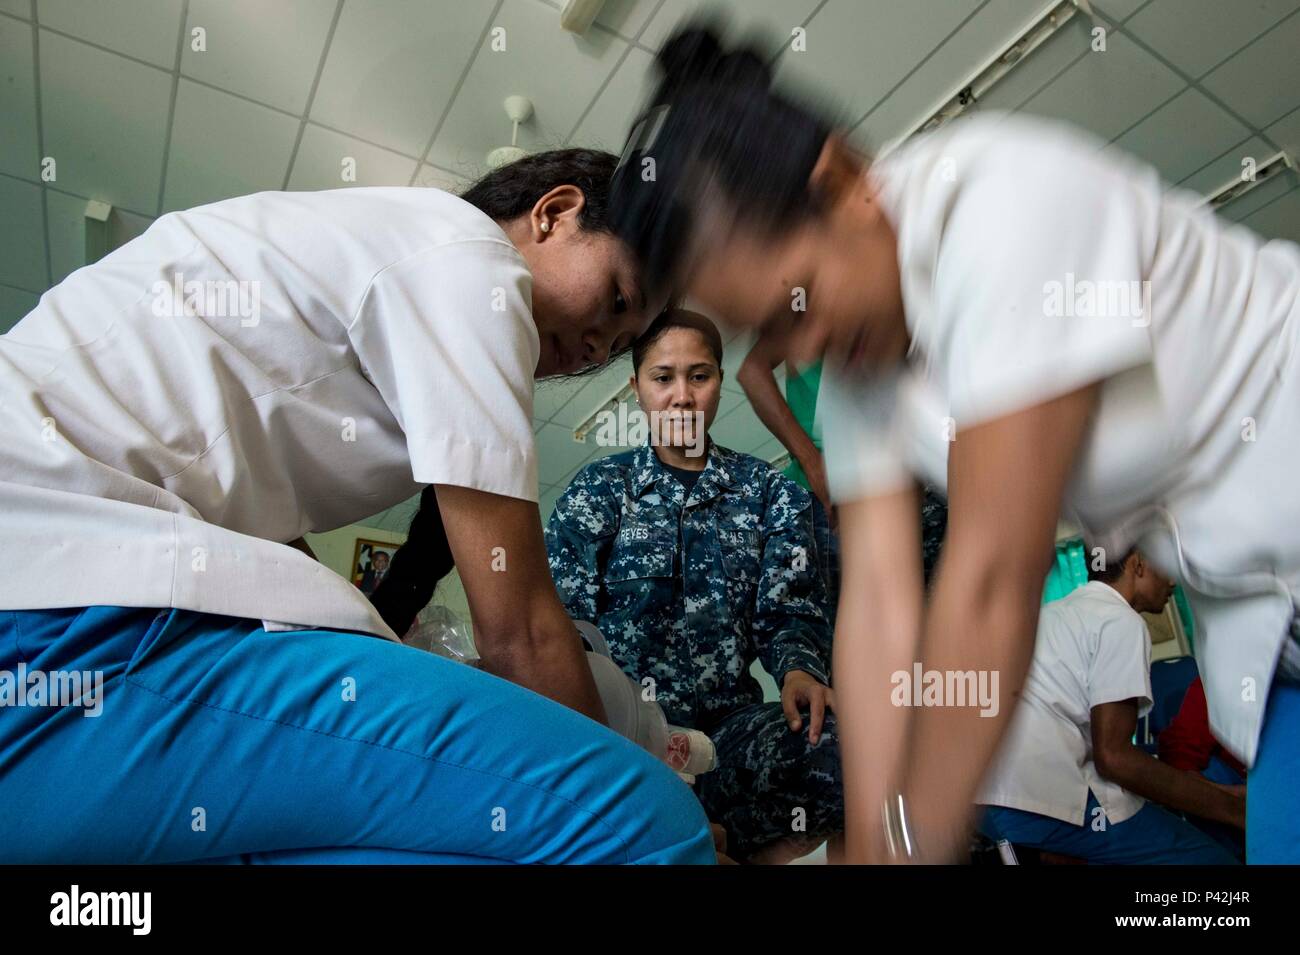 160610-N-QW941-127 DILI, Timor Leste (June 10, 2016) Hospital Corpsman 1st Class Rosella Reyes, a native of the Philippines, conducts basic life support training for Timorese students at the International Health Institute during Pacific Partnership 2016. This year marks the sixth time the mission visited Timor Leste since its first visit in 2006. Medical, engineering and various other personnel embarked aboard hospital ship USNS Mercy (T-AH 19) are working side-by-side with partner nation counterparts, exchanging ideas, building best practices and relationships to ensure preparedness should di Stock Photo